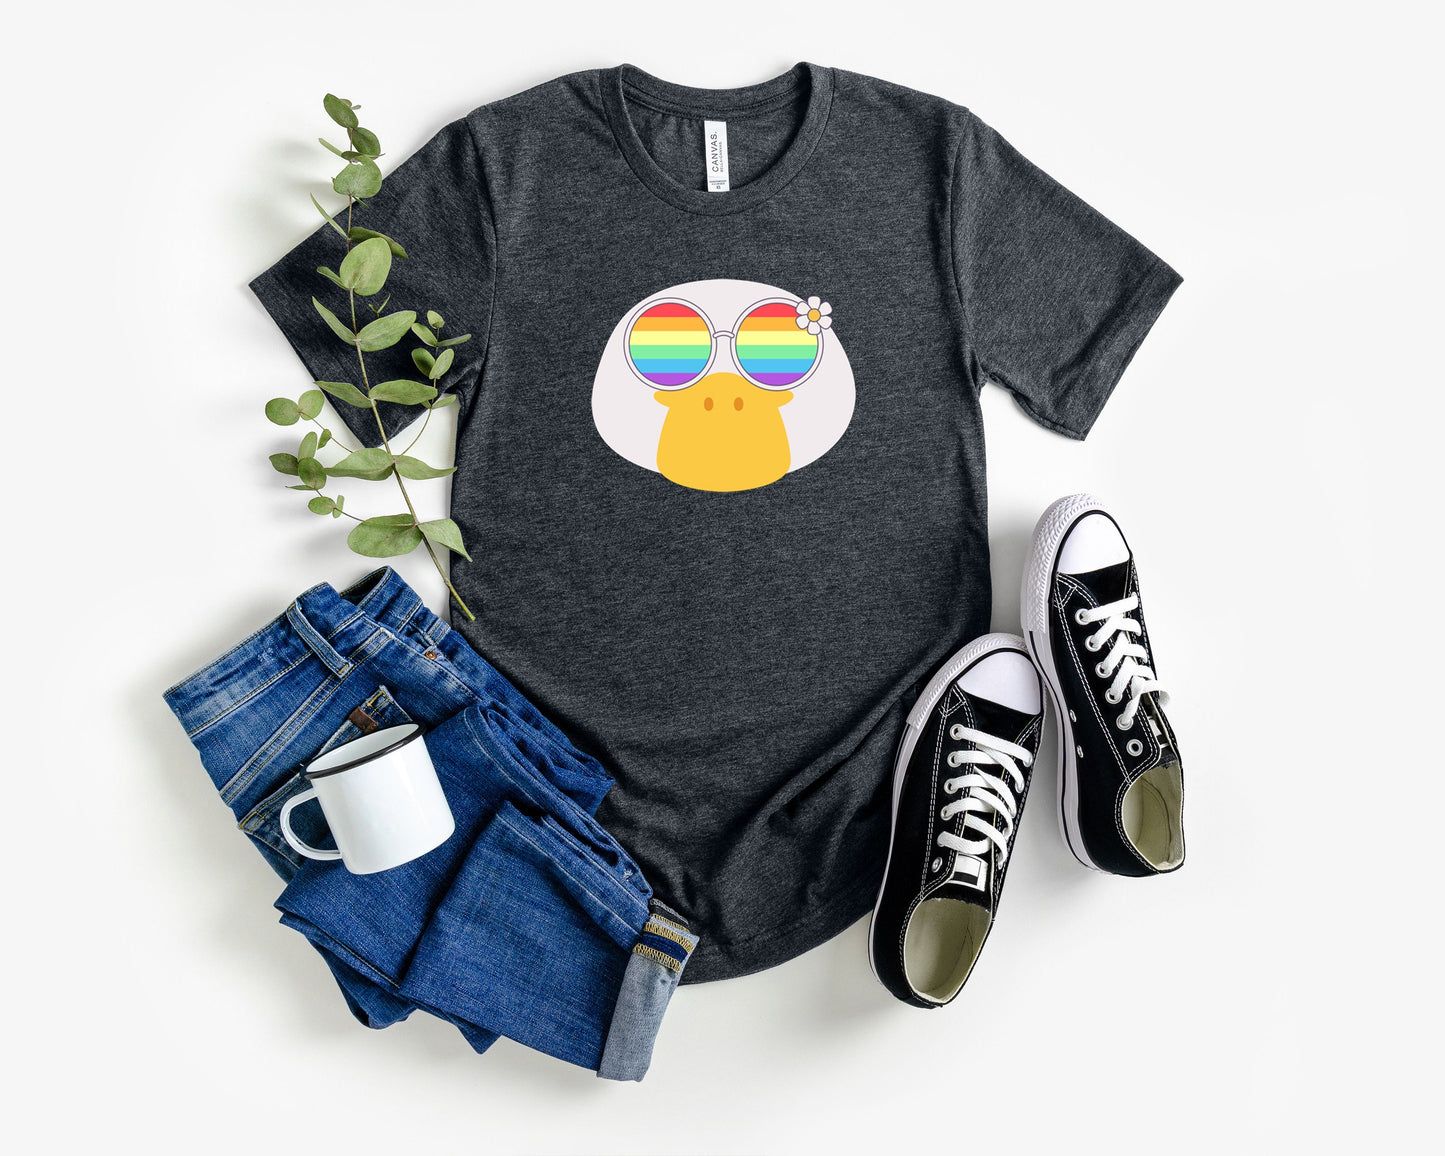 Super cute duck with rainbow glasses shirt, Rainbow glasses on an adorable duck, precious duck showing off pride. Beautiful pride duck